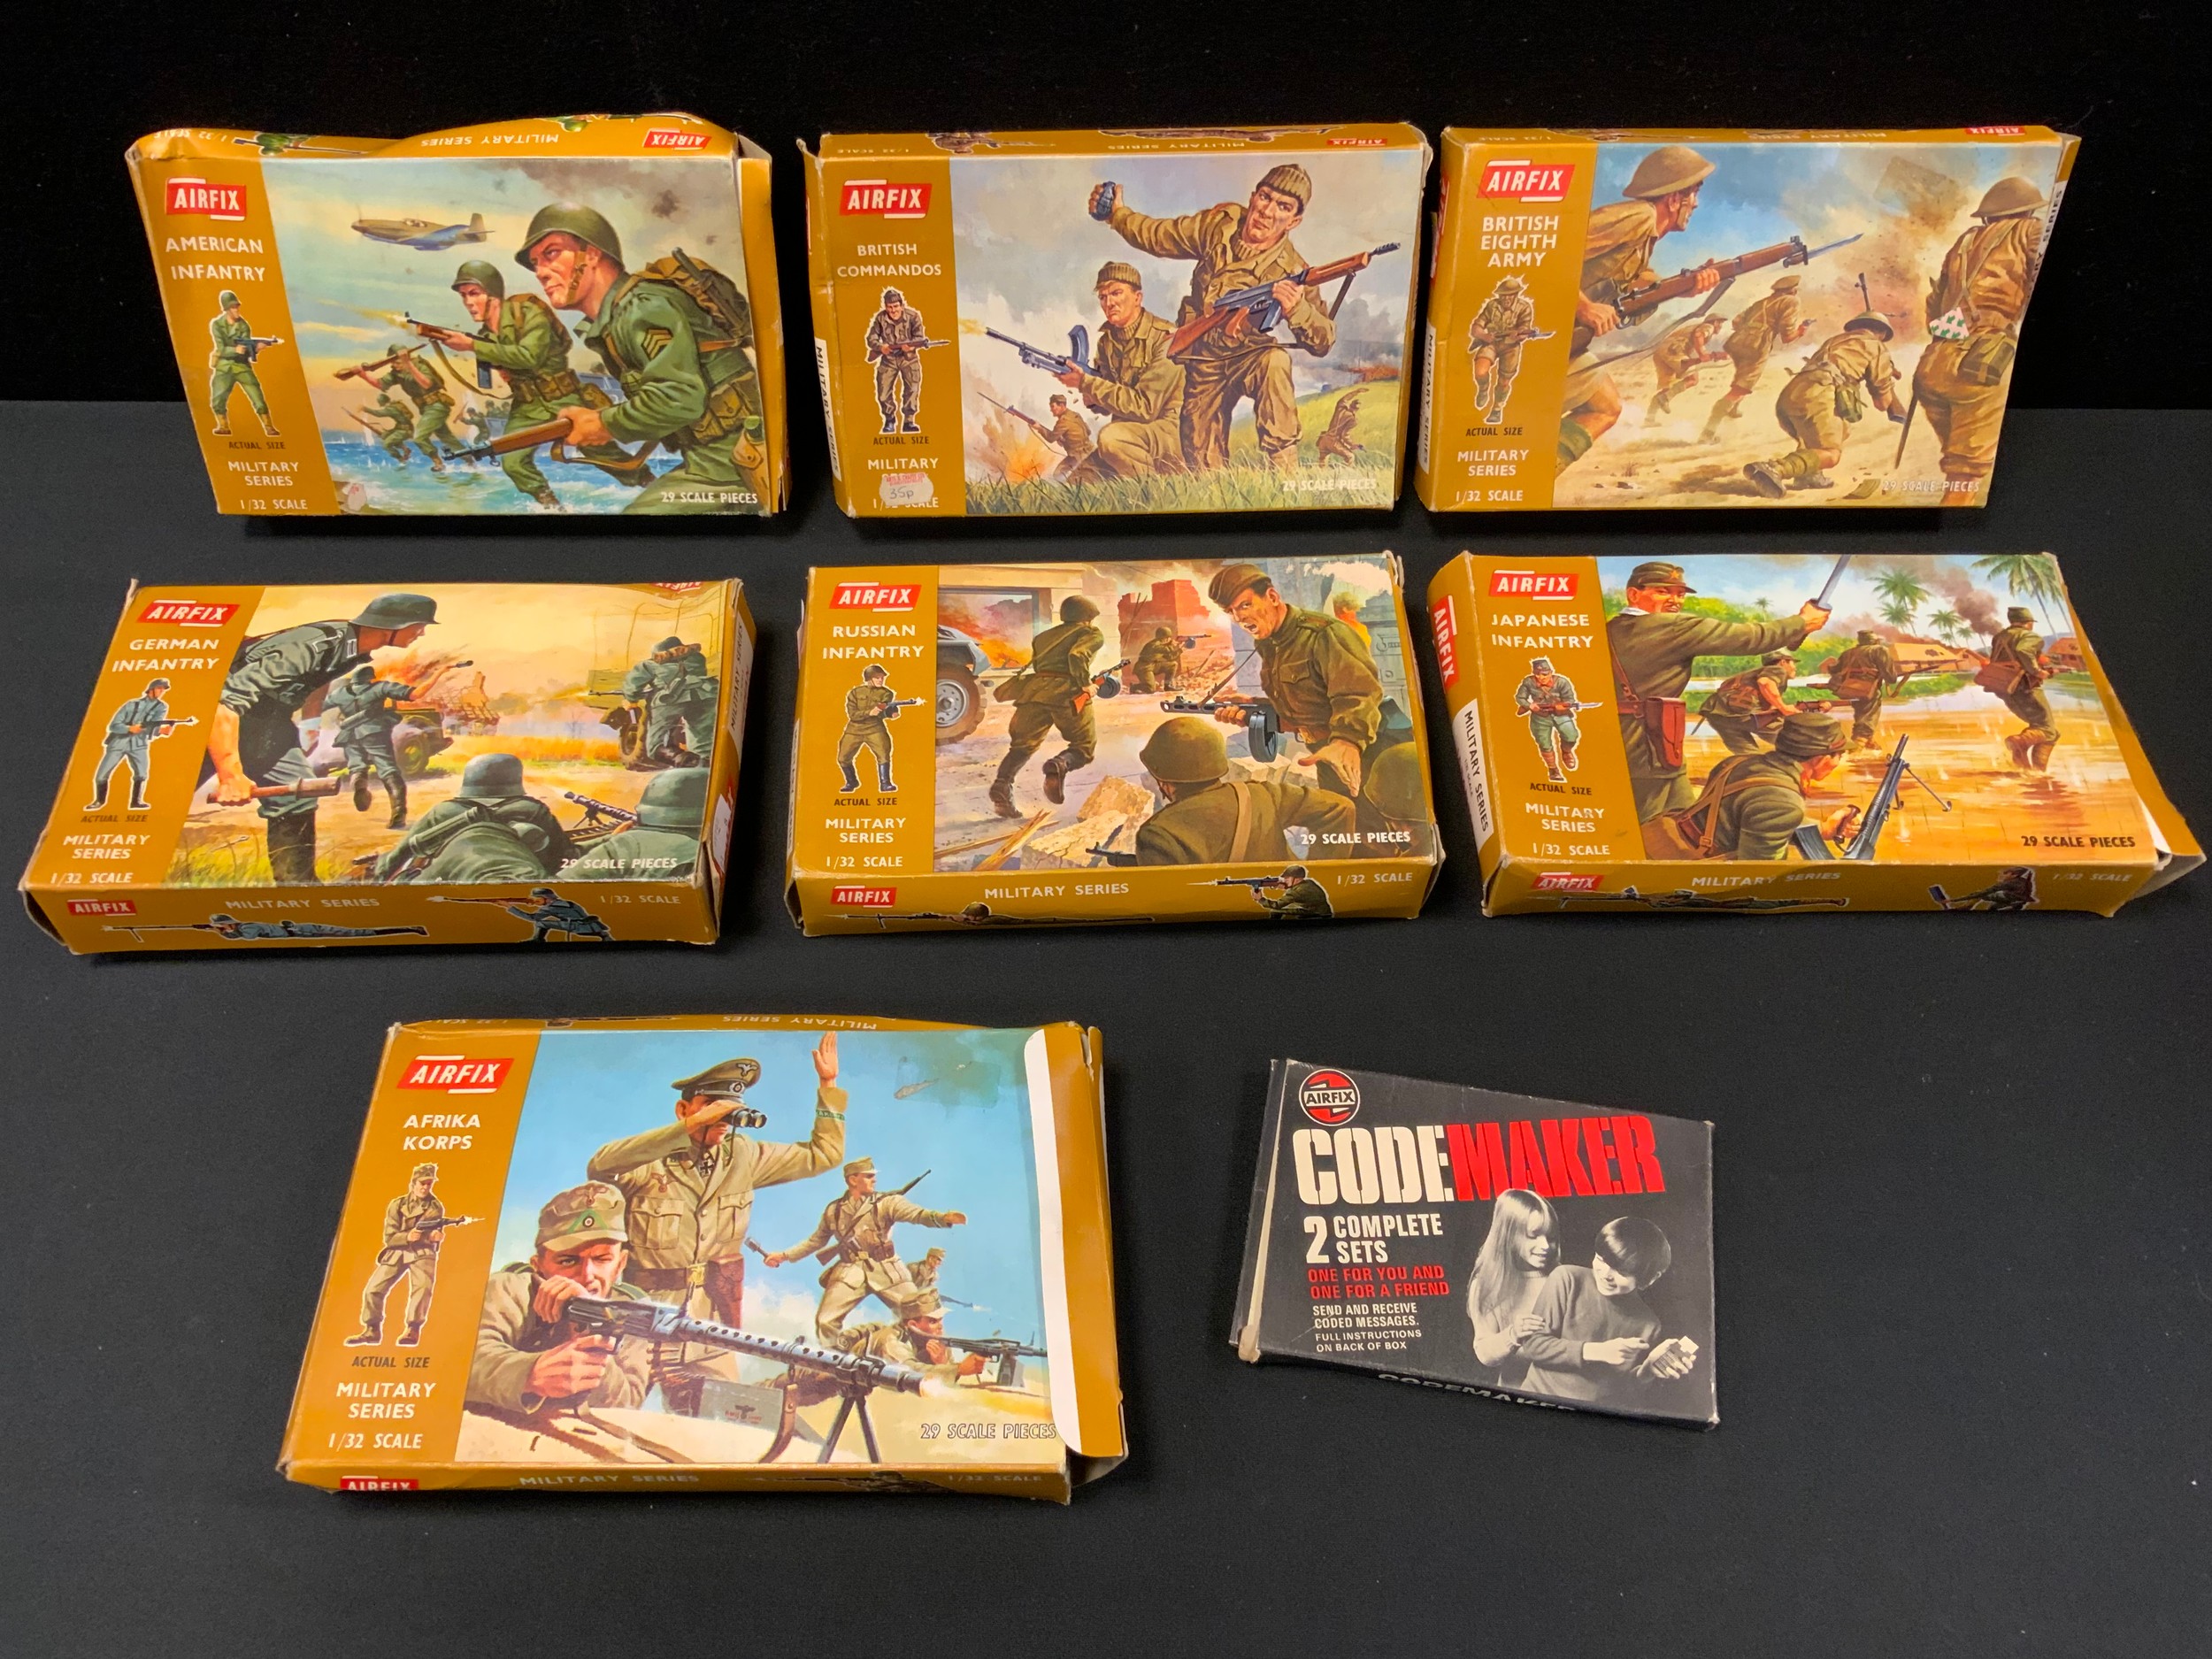 Airfix 1:32 scale Military series soldiers, British Commandoes, American Infantry, British Eighth